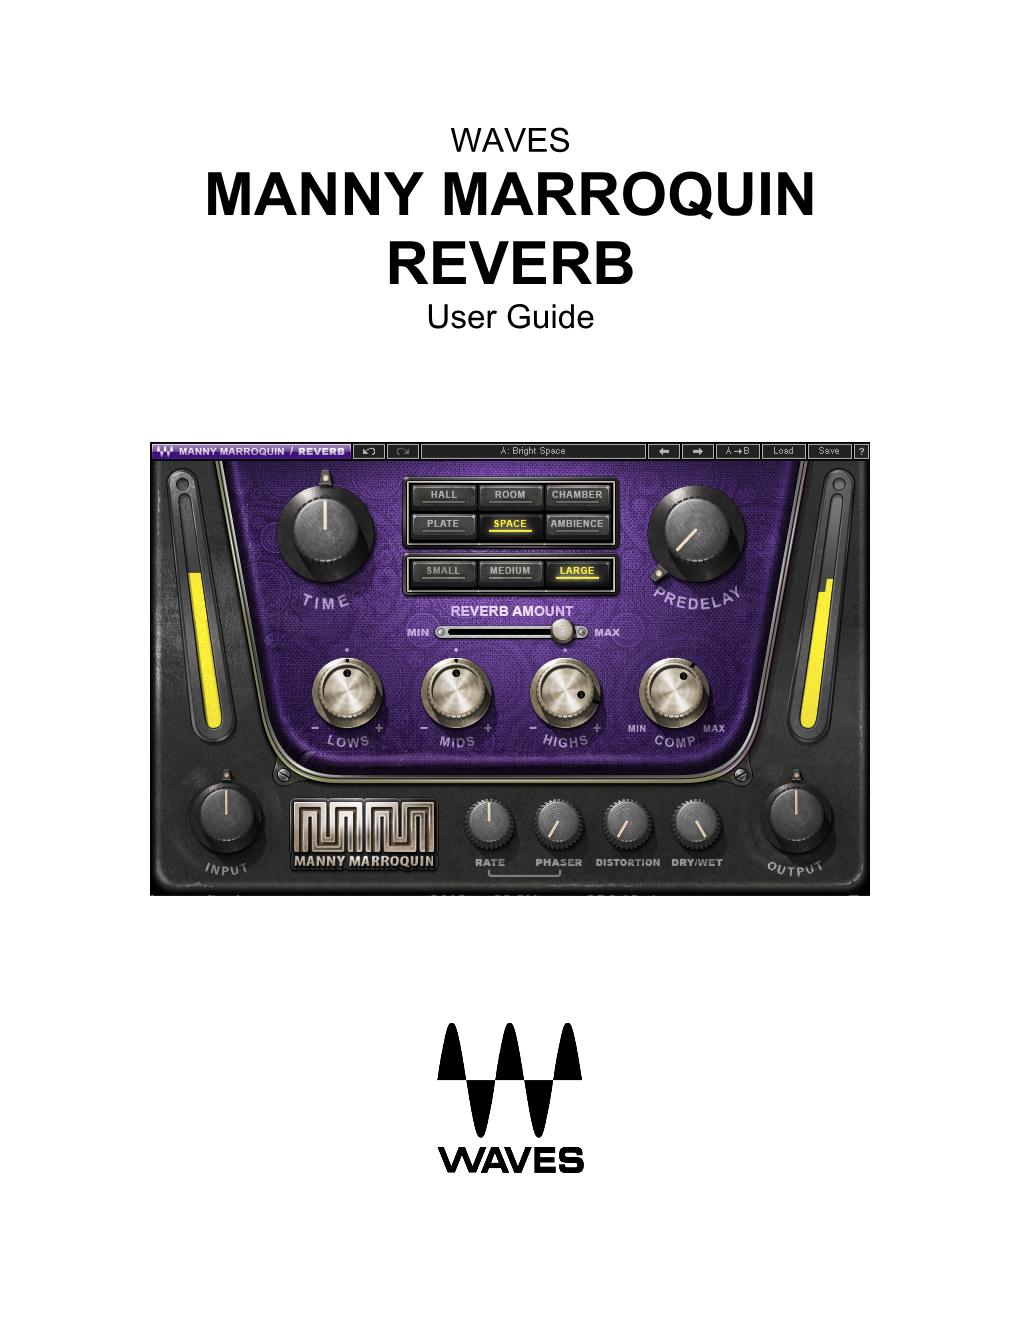 MANNY MARROQUIN REVERB User Guide TABLE of CONTENTS